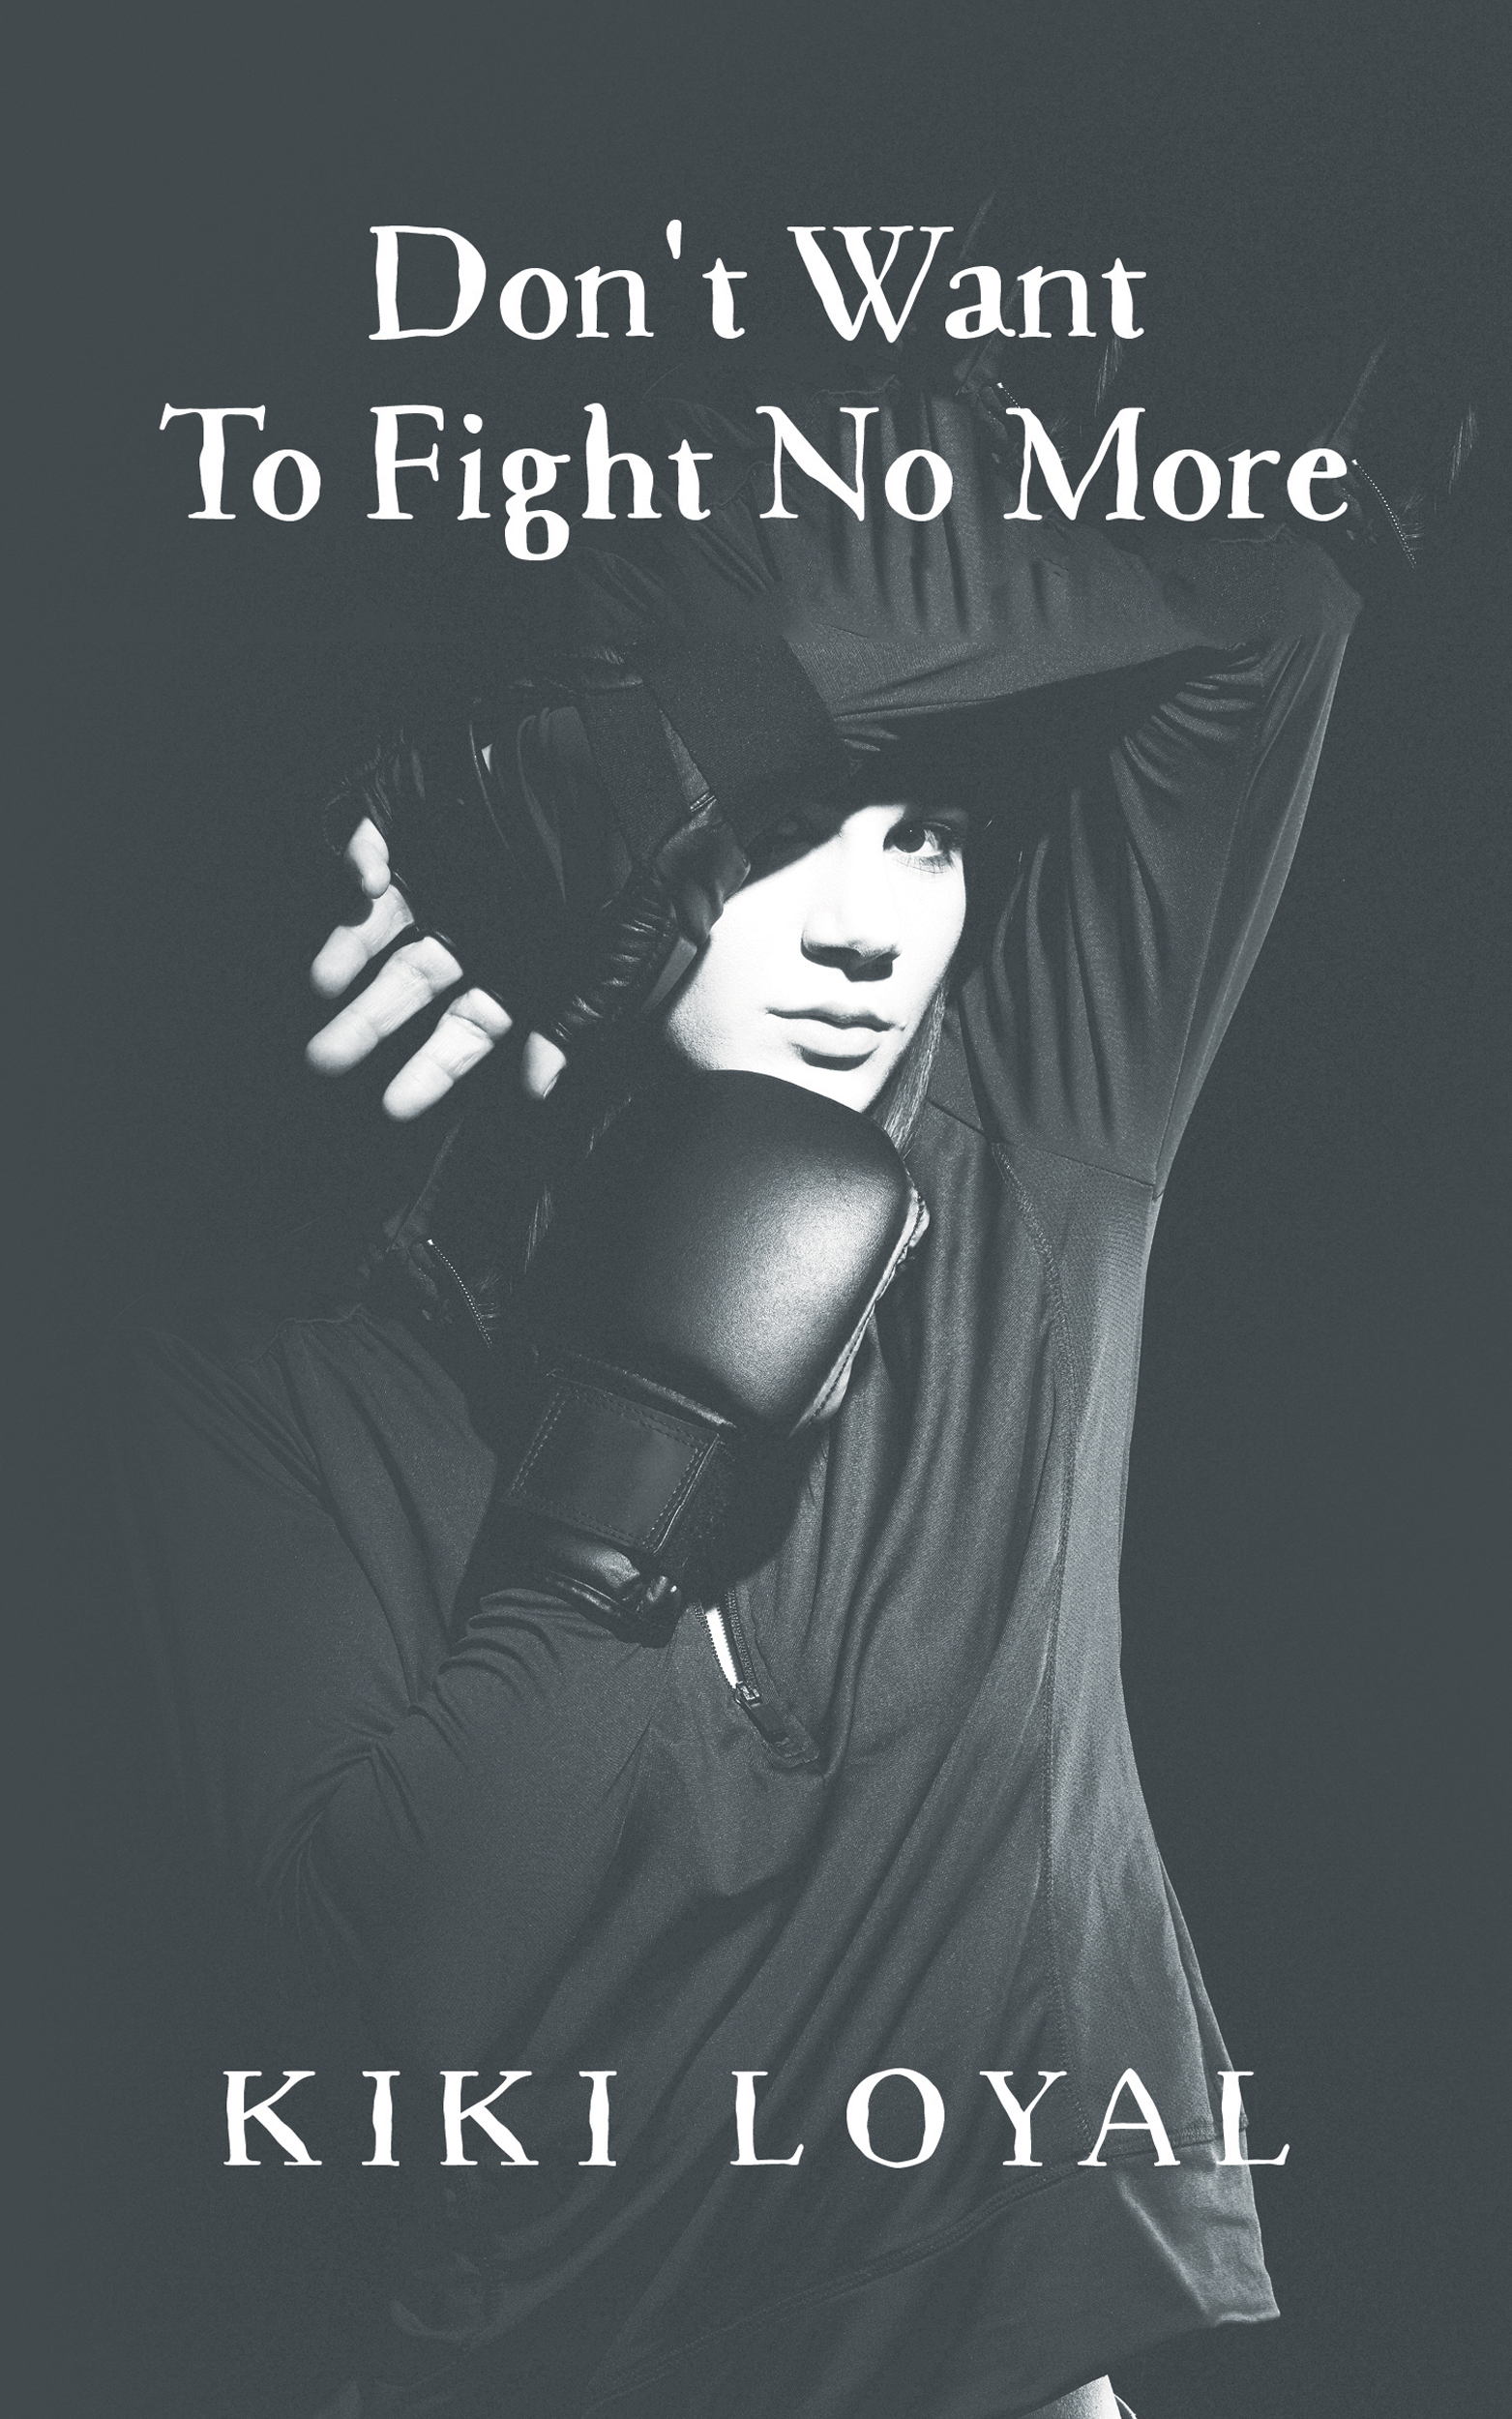 Tough love is something Alice Class knows all too well.  She searches for the real thing in Don't Want To Fight No More, a story about never giving up.